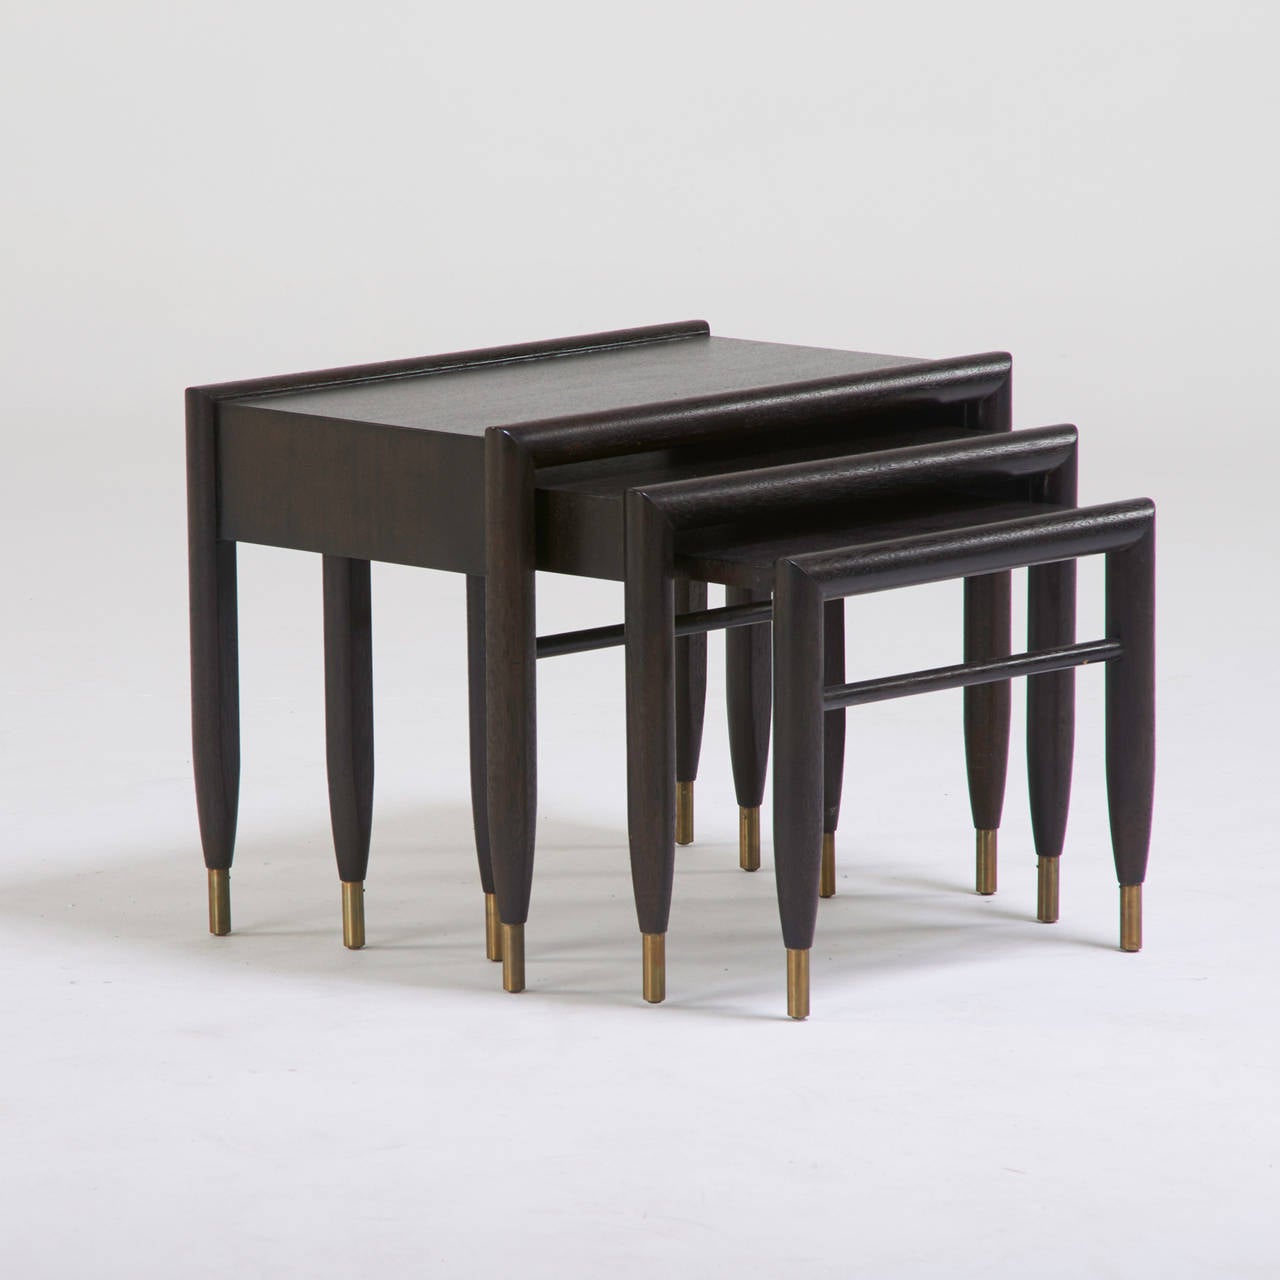 John Keal, three nesting tables, California, 1950s, stained and lacquered mahogany, brass, decal labels. Dimensions: Largest 19.5" x 25.5" x 16".